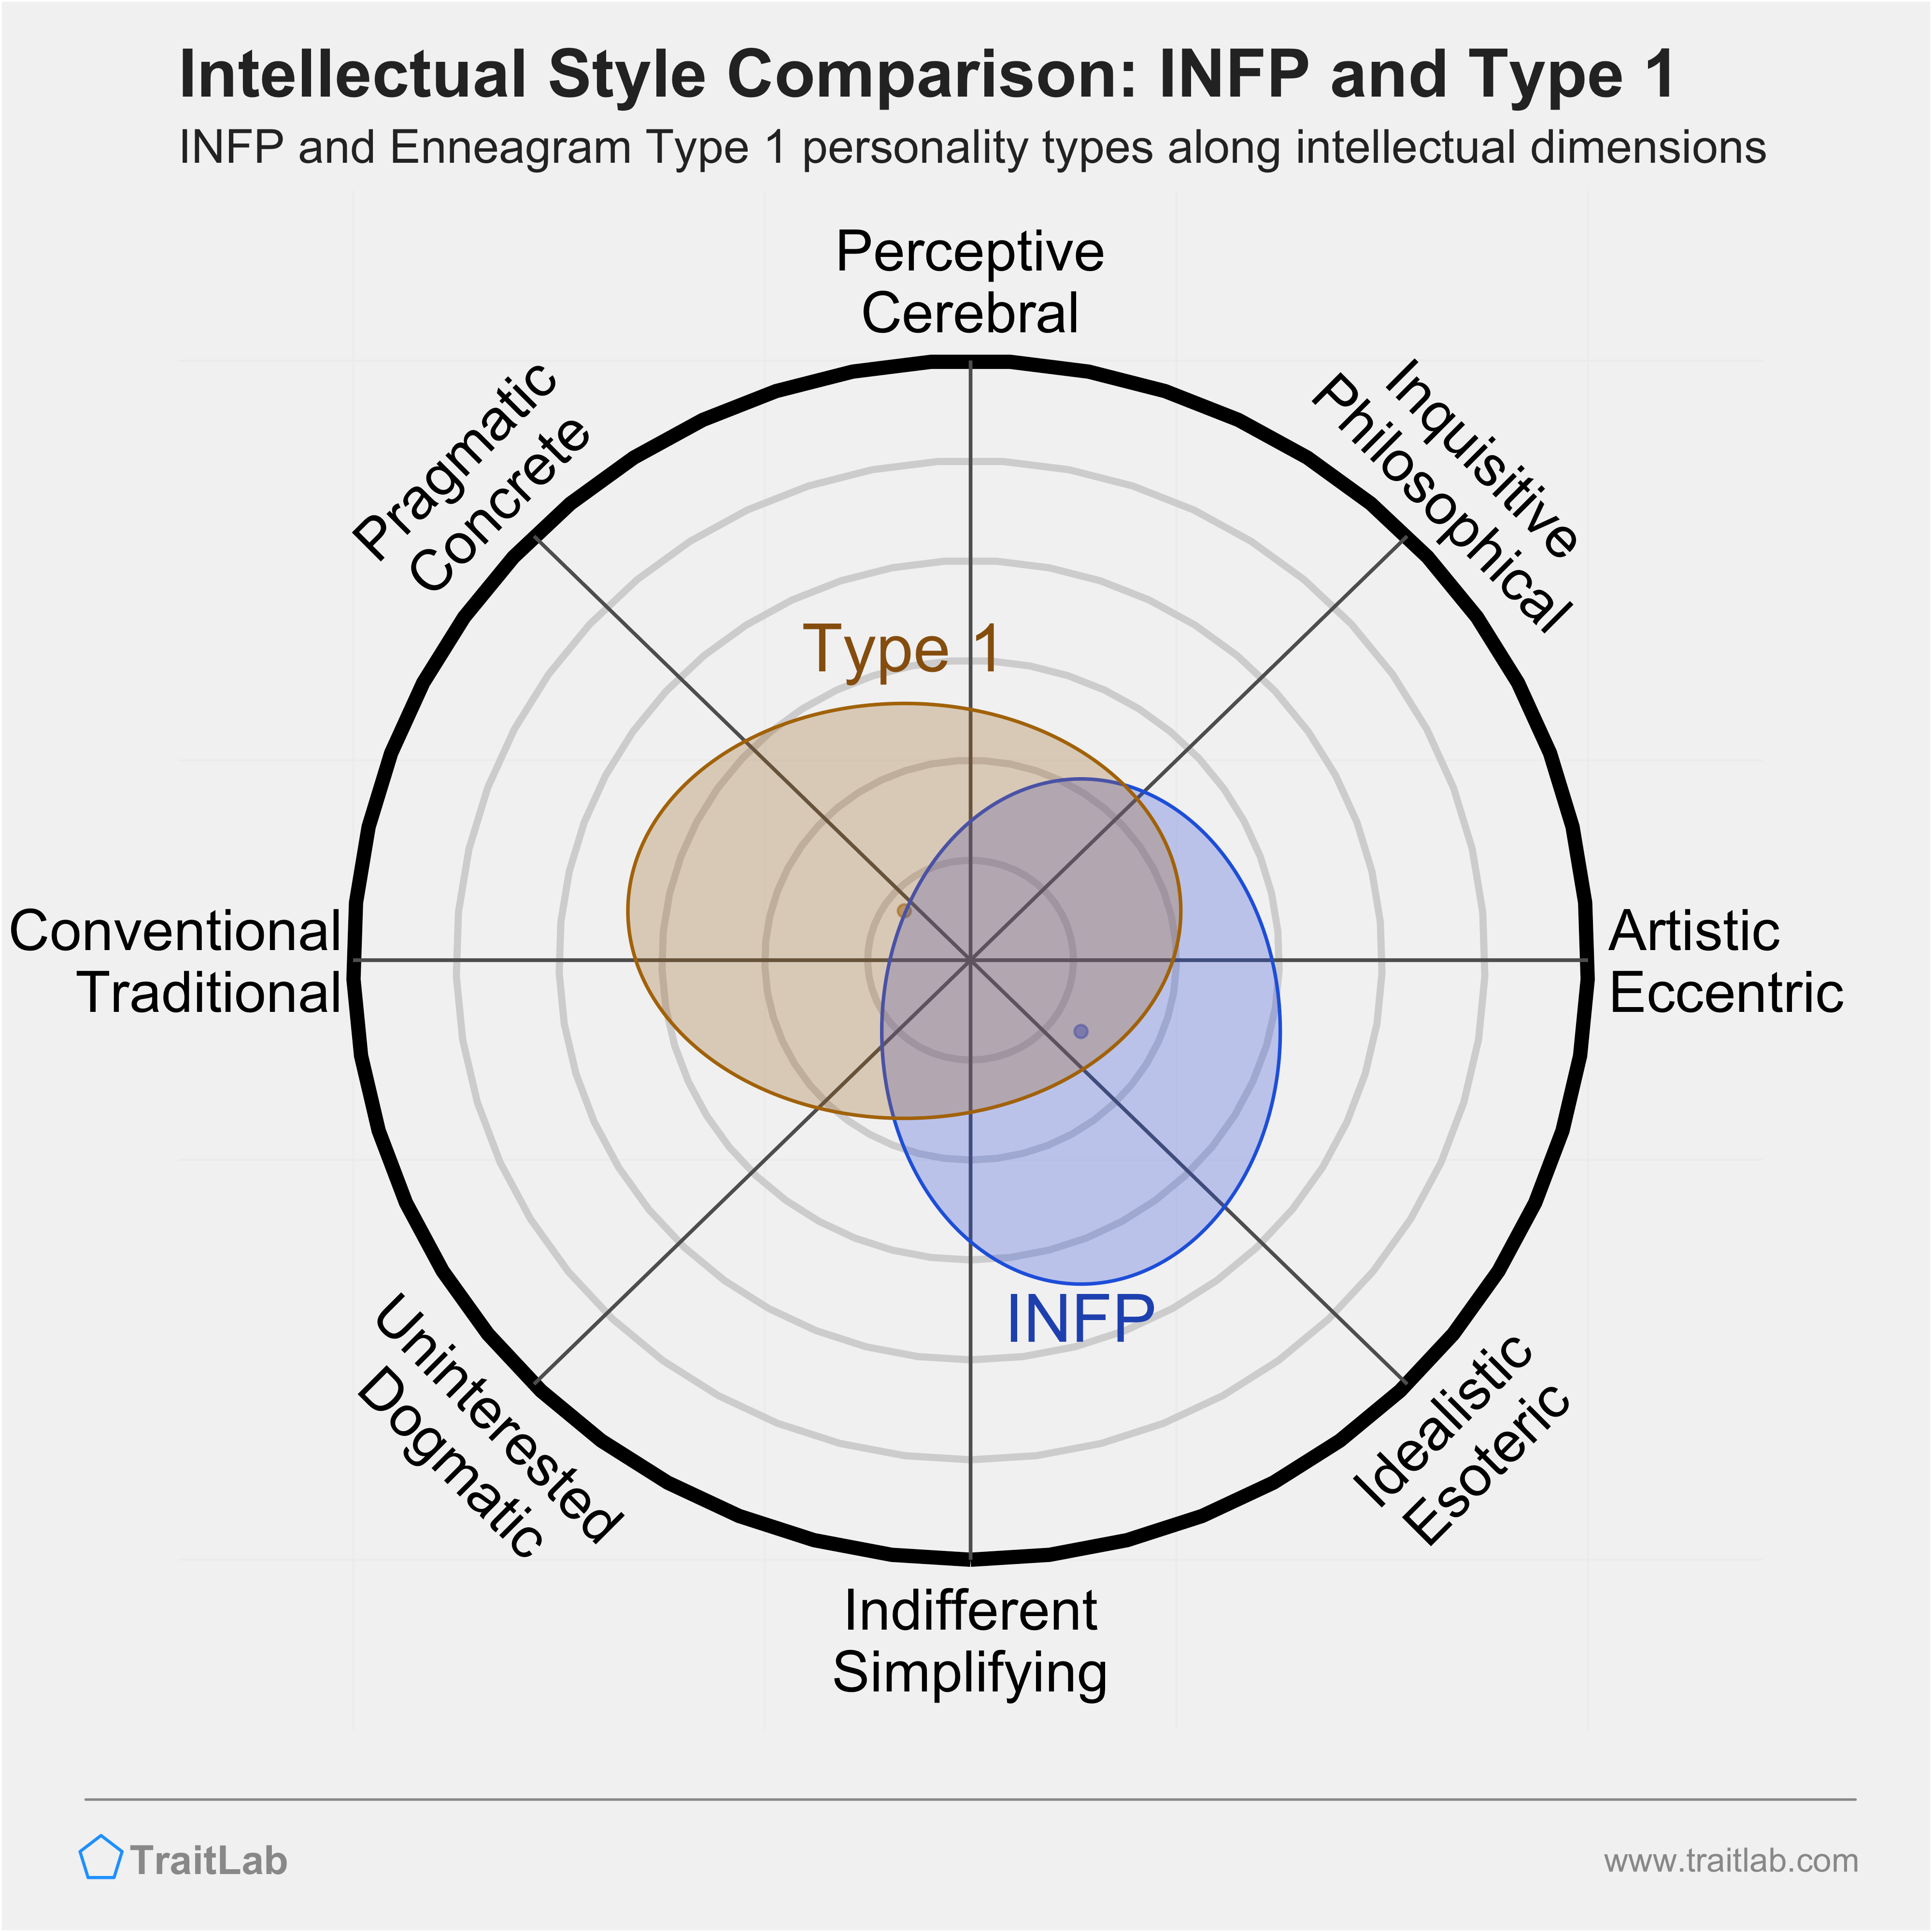 INFP and Type 1 comparison across intellectual dimensions